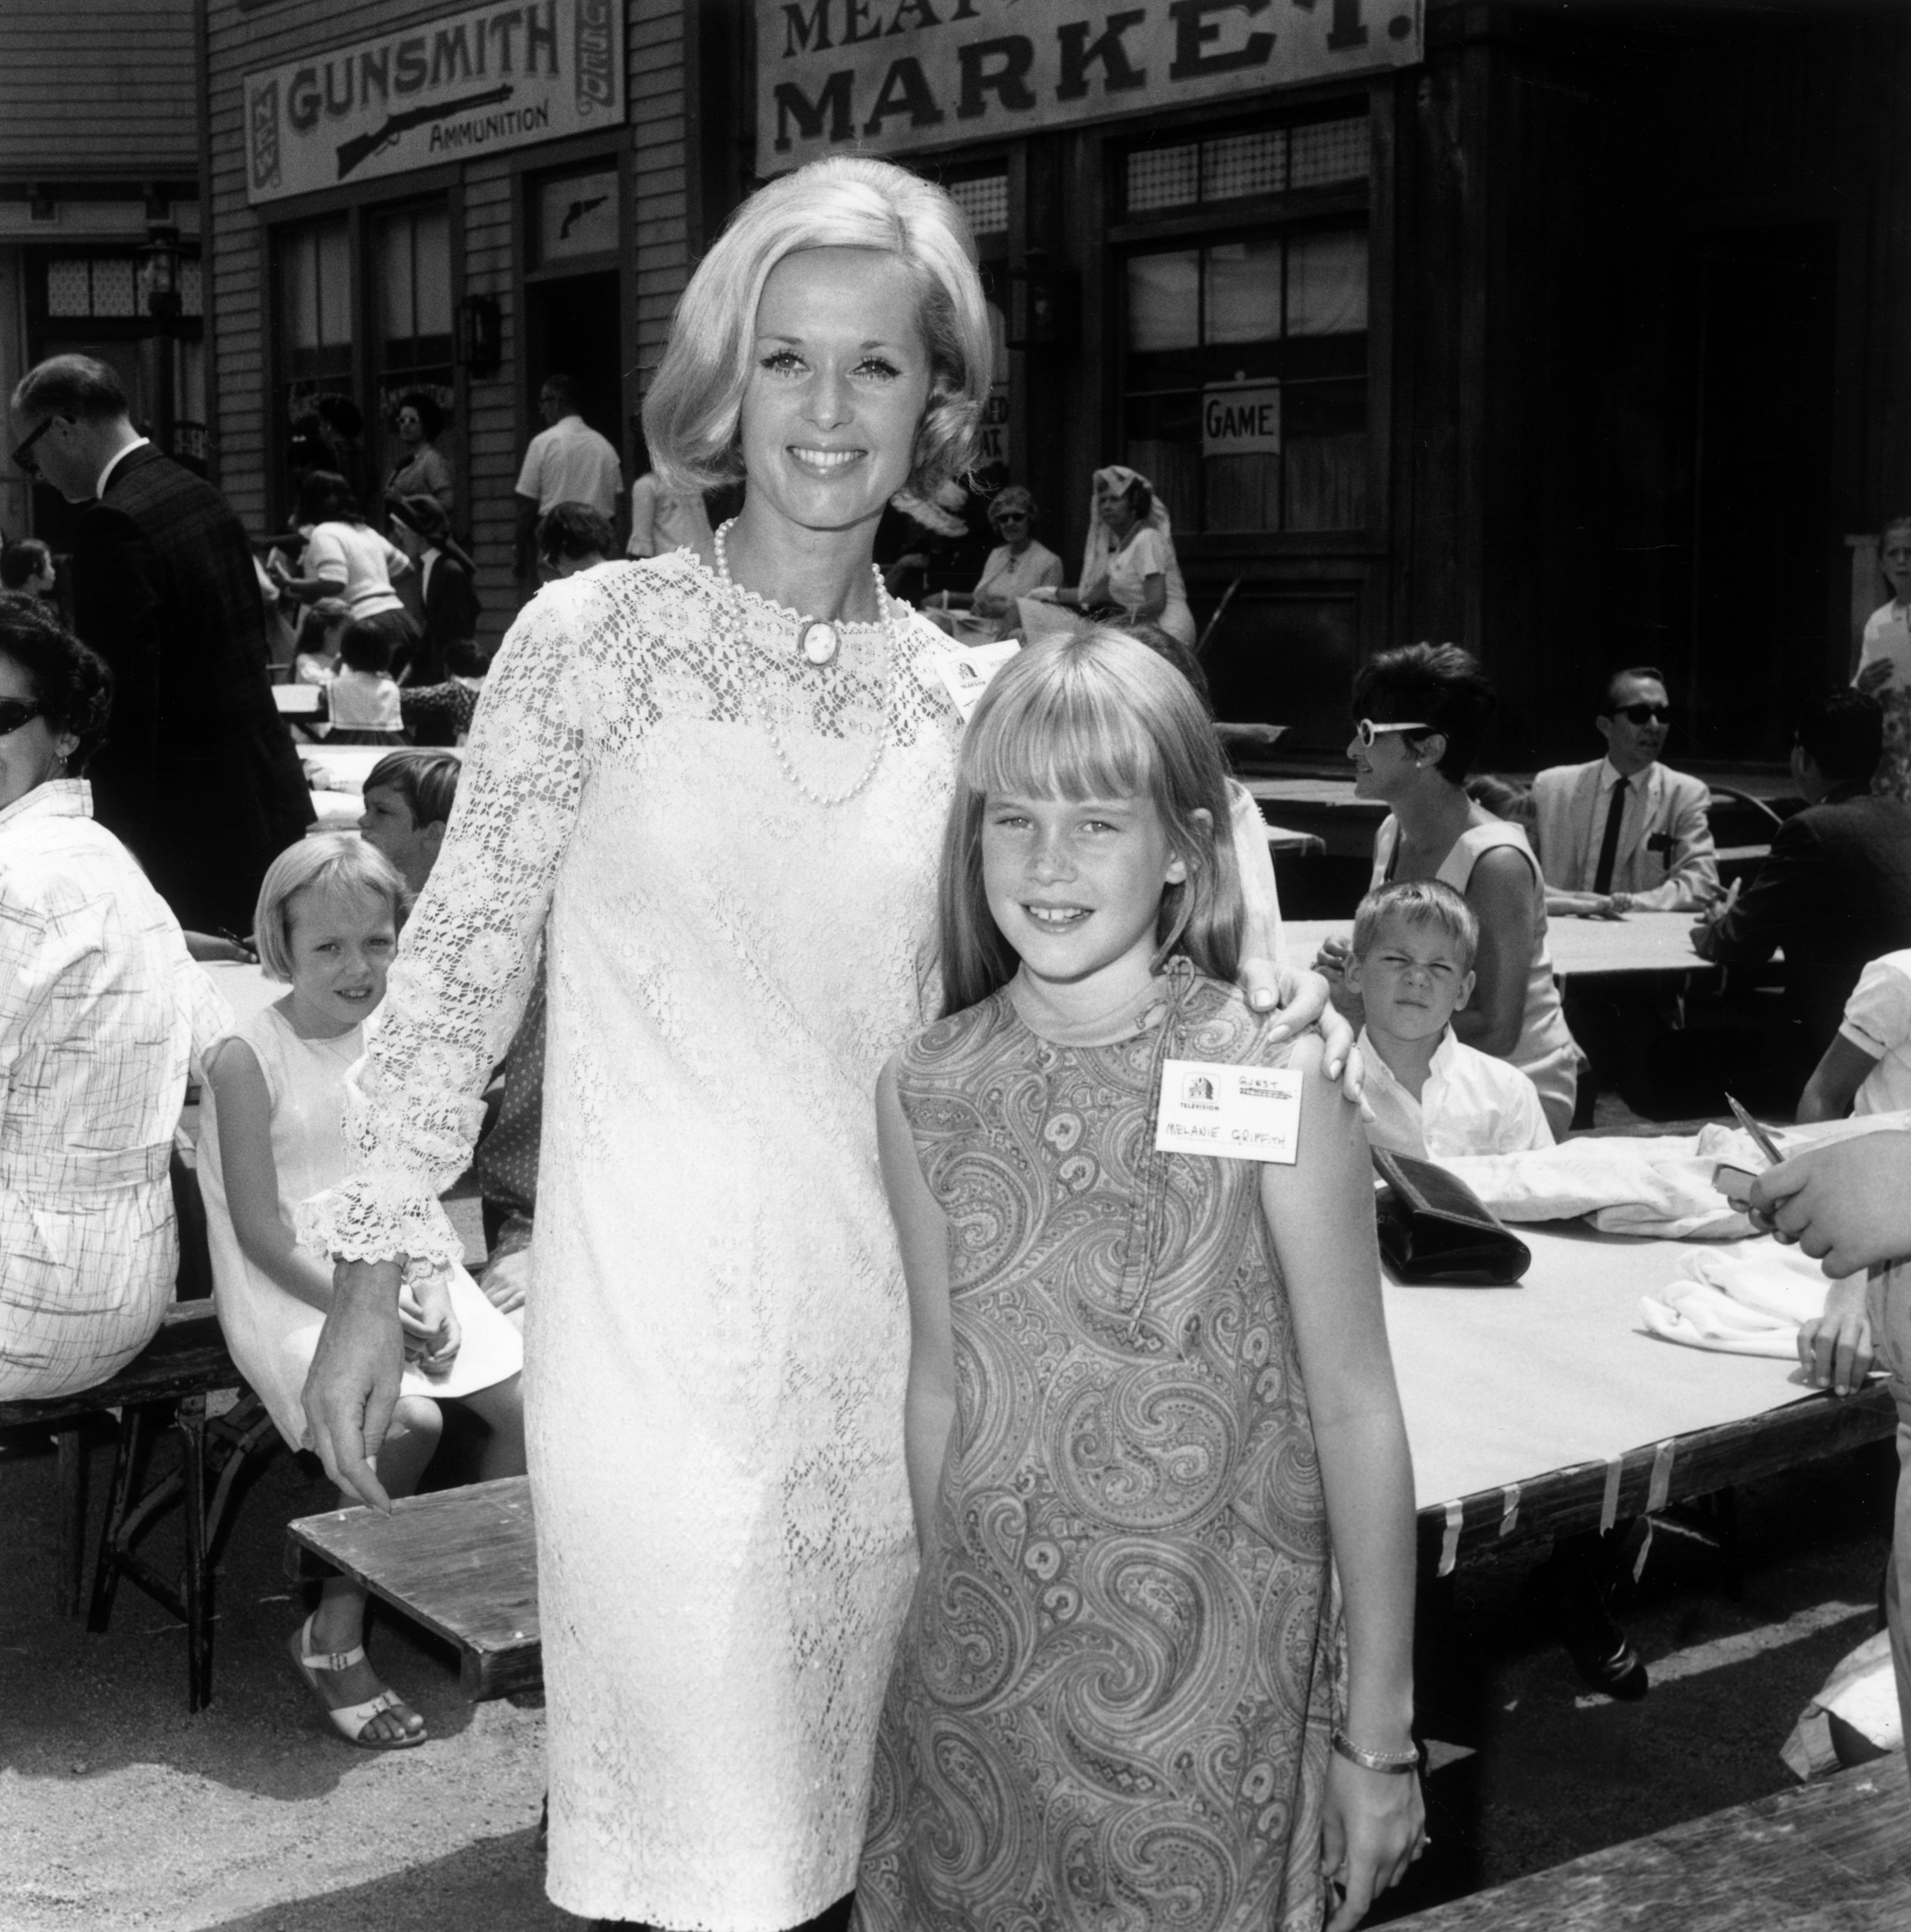 Tippi Hedren and her daughter, Melanie Griffith, at a children's party, a 'Batman' luncheon for an orphanage in California | Source: Getty Images